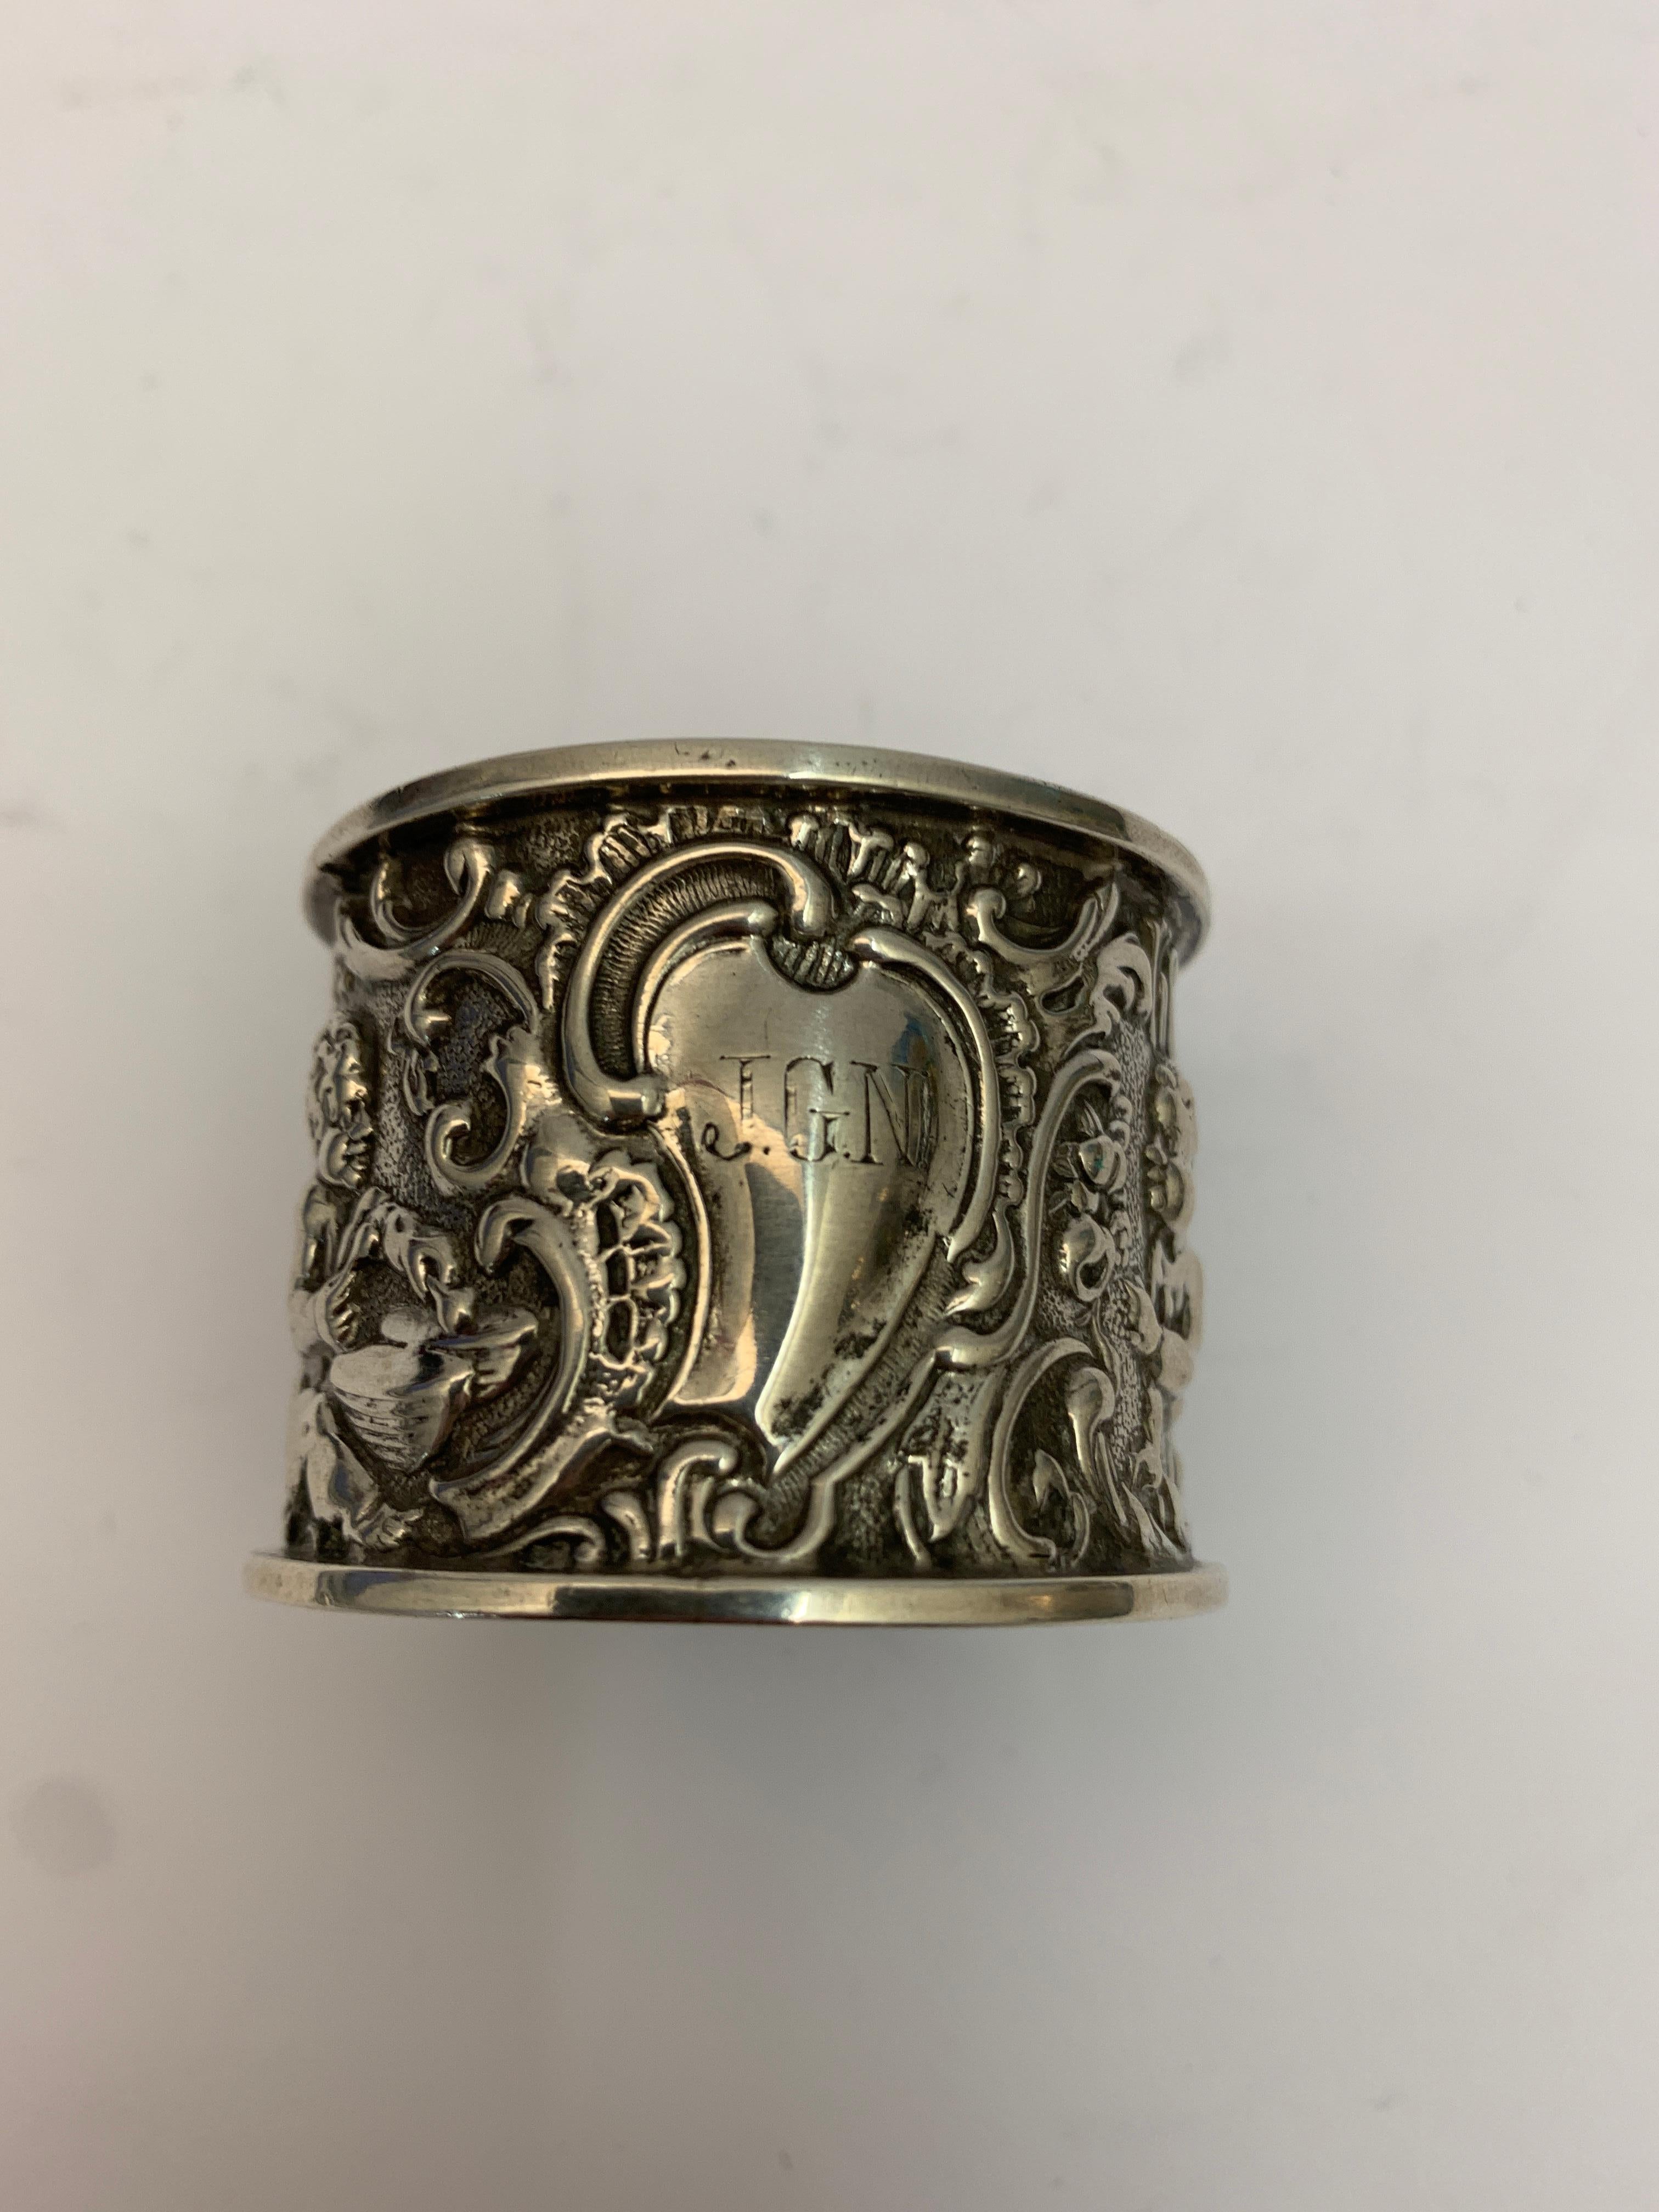 A single intricately decorated 19th century silver napkin ring.

Made in Birmingham in 1895.